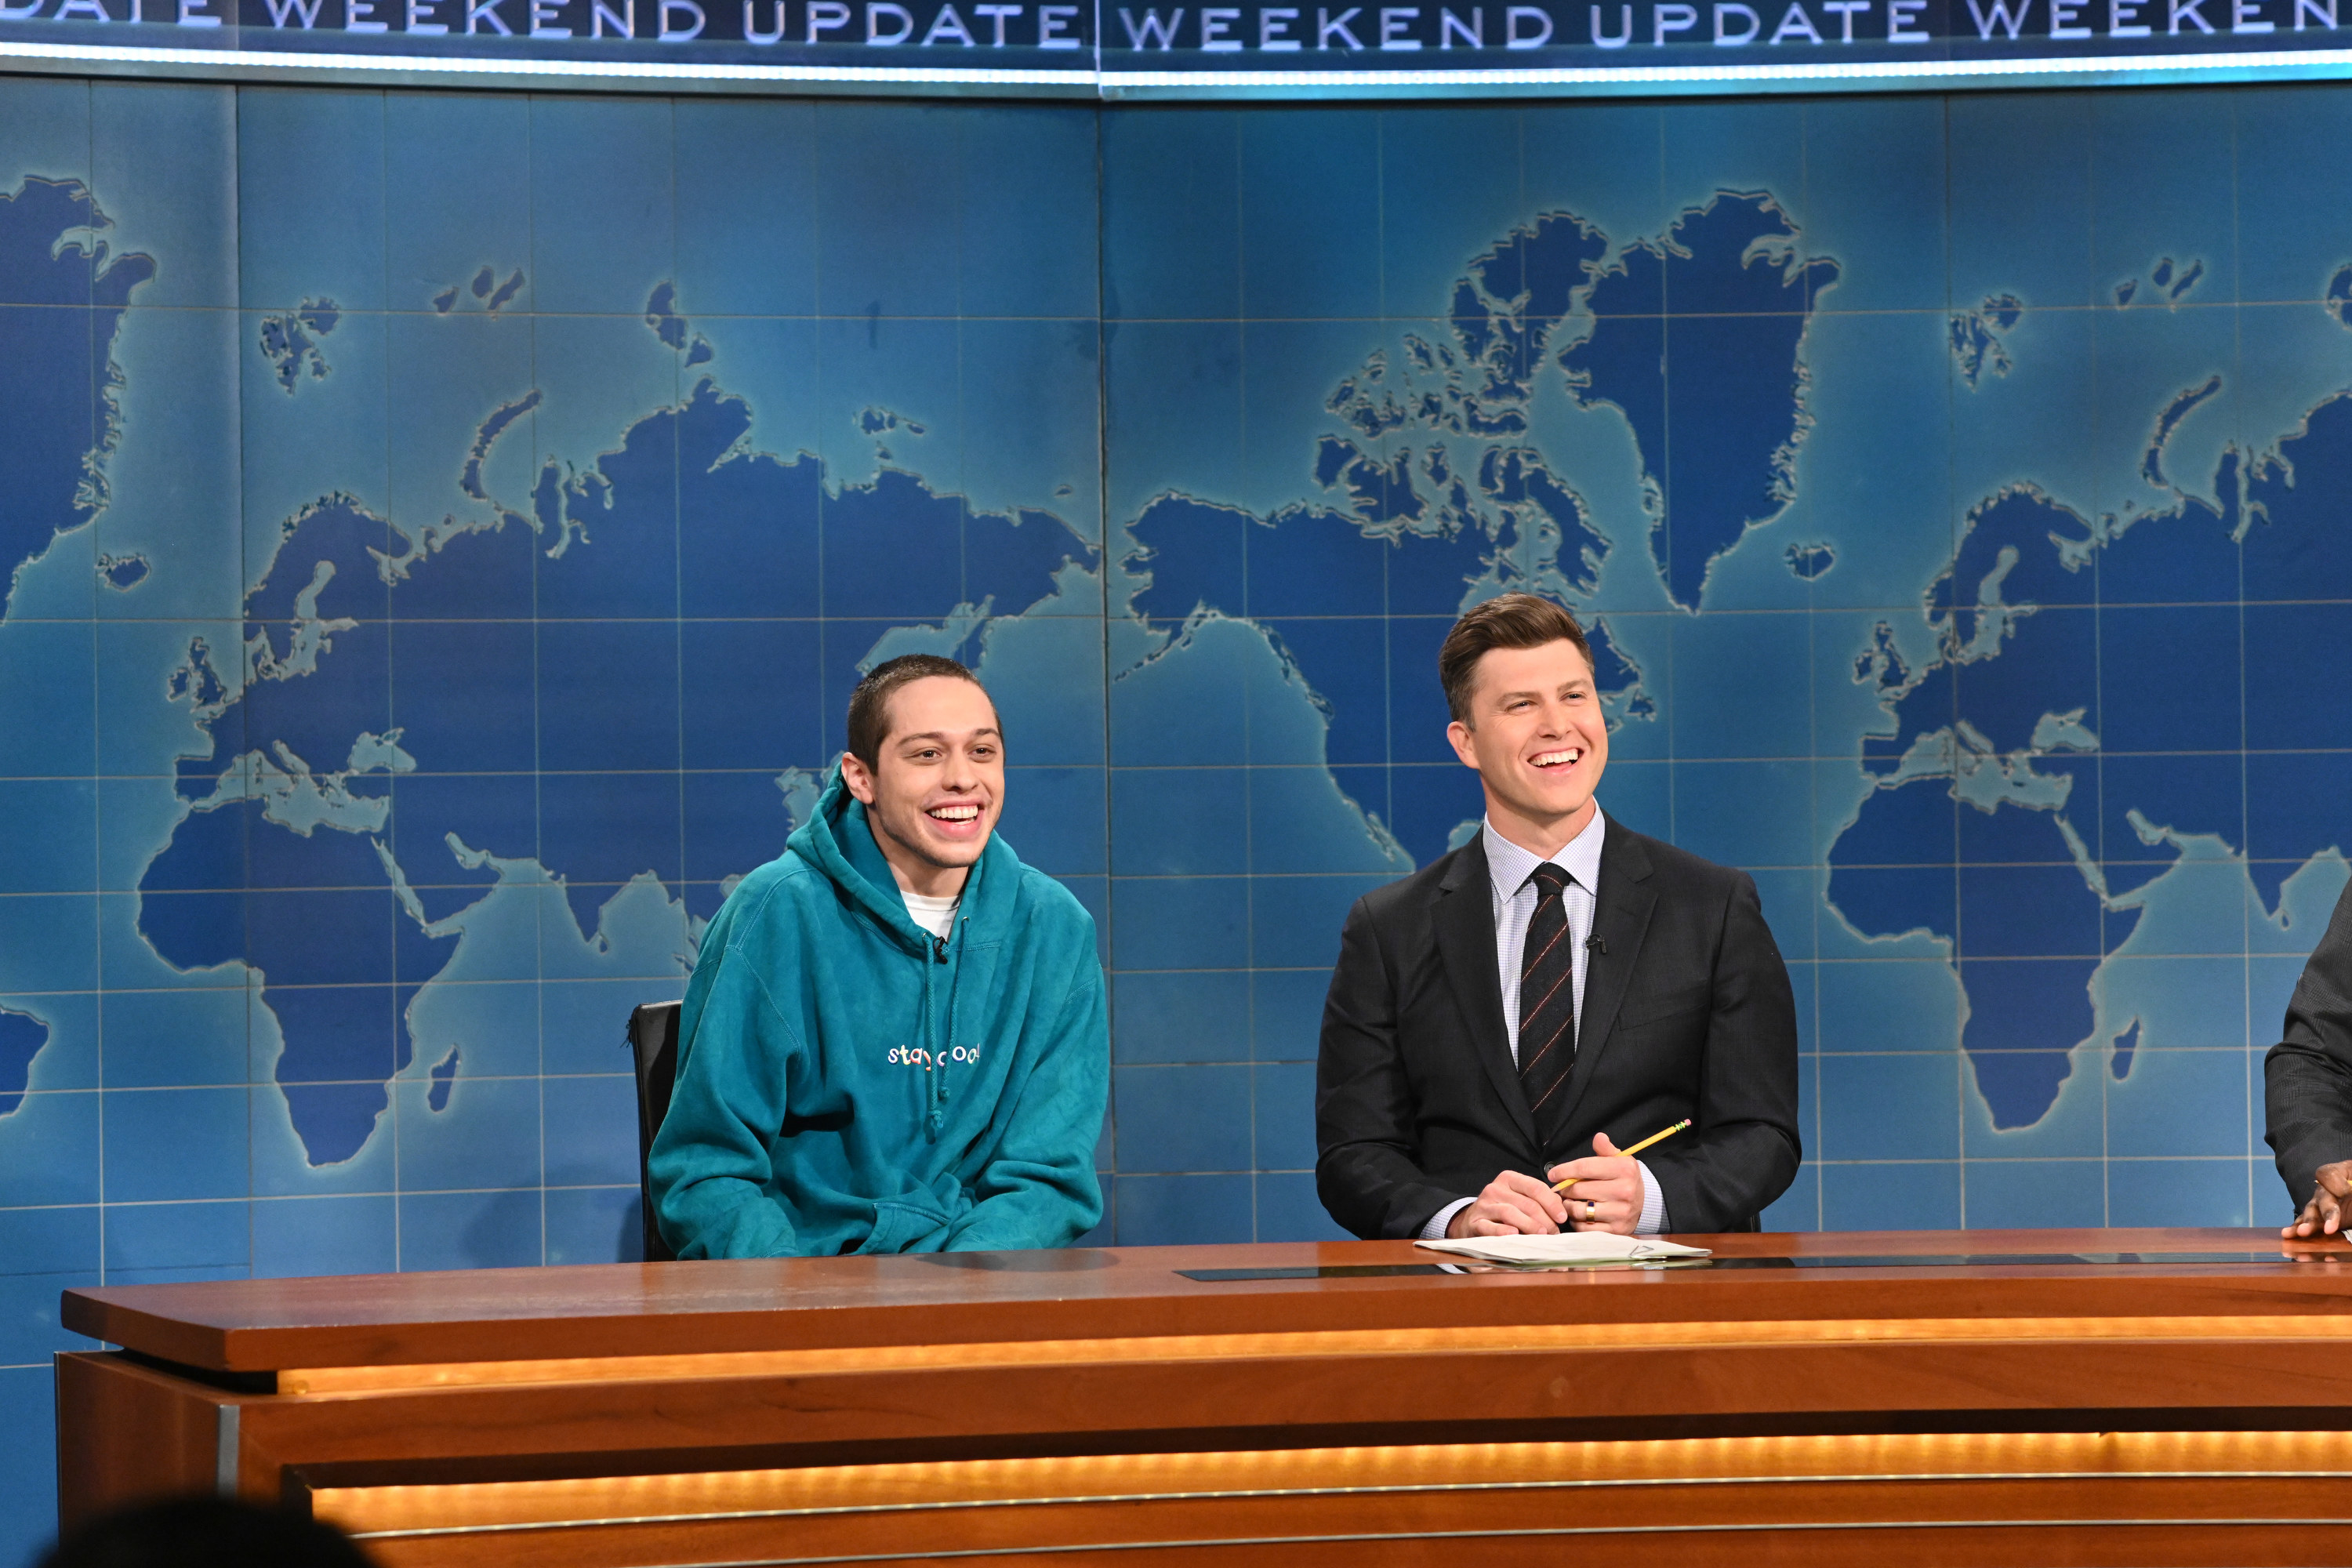 Pete Davidson and Colin Jost host Weekend Update on Saturday Night Live